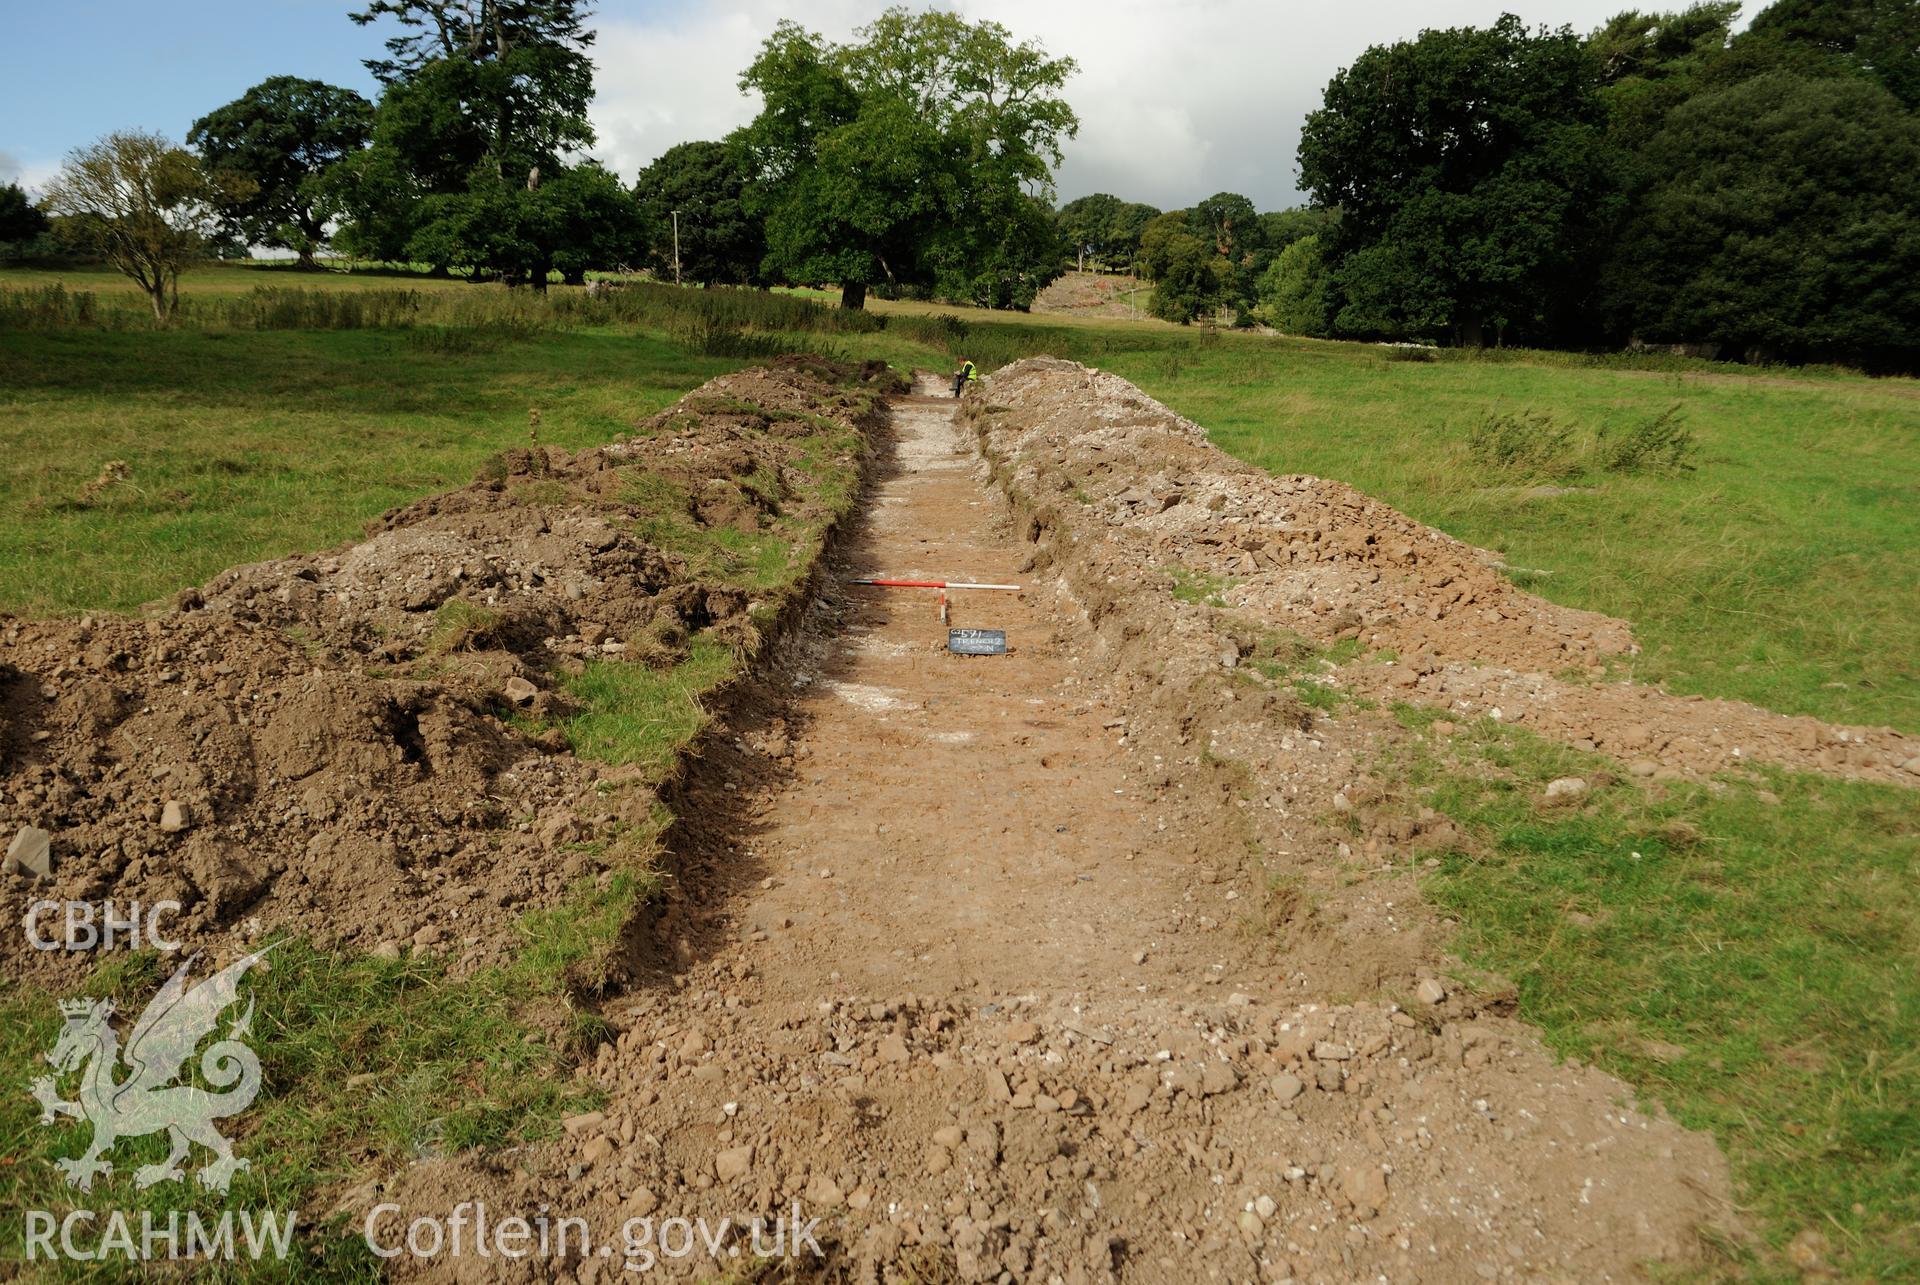 View from the east showing eastern terminal of Trench 2, post excavation. Photographed during archaeological evaluation of Kinmel Park, Abergele, conducted by Gwynedd Archaeological Trust on 24th August 2018. Project no. 2571.